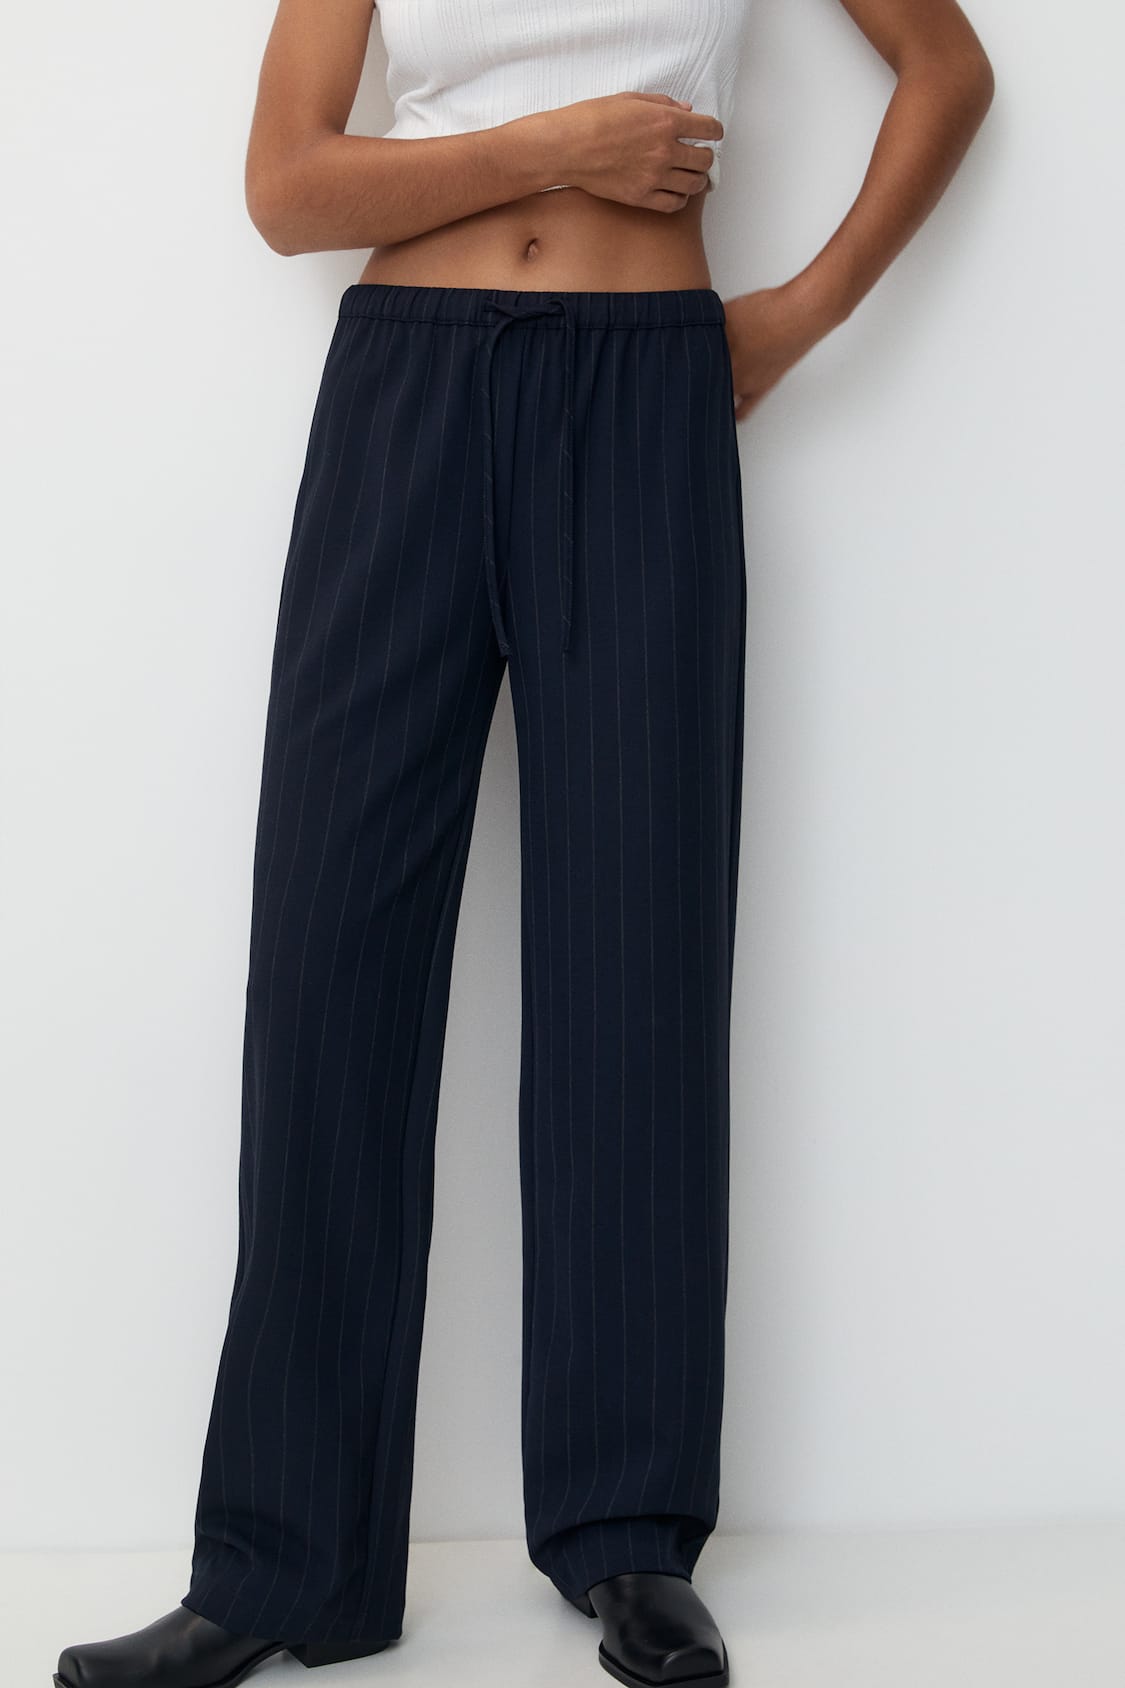 Flowing pants with elastic waistband - pull&bear